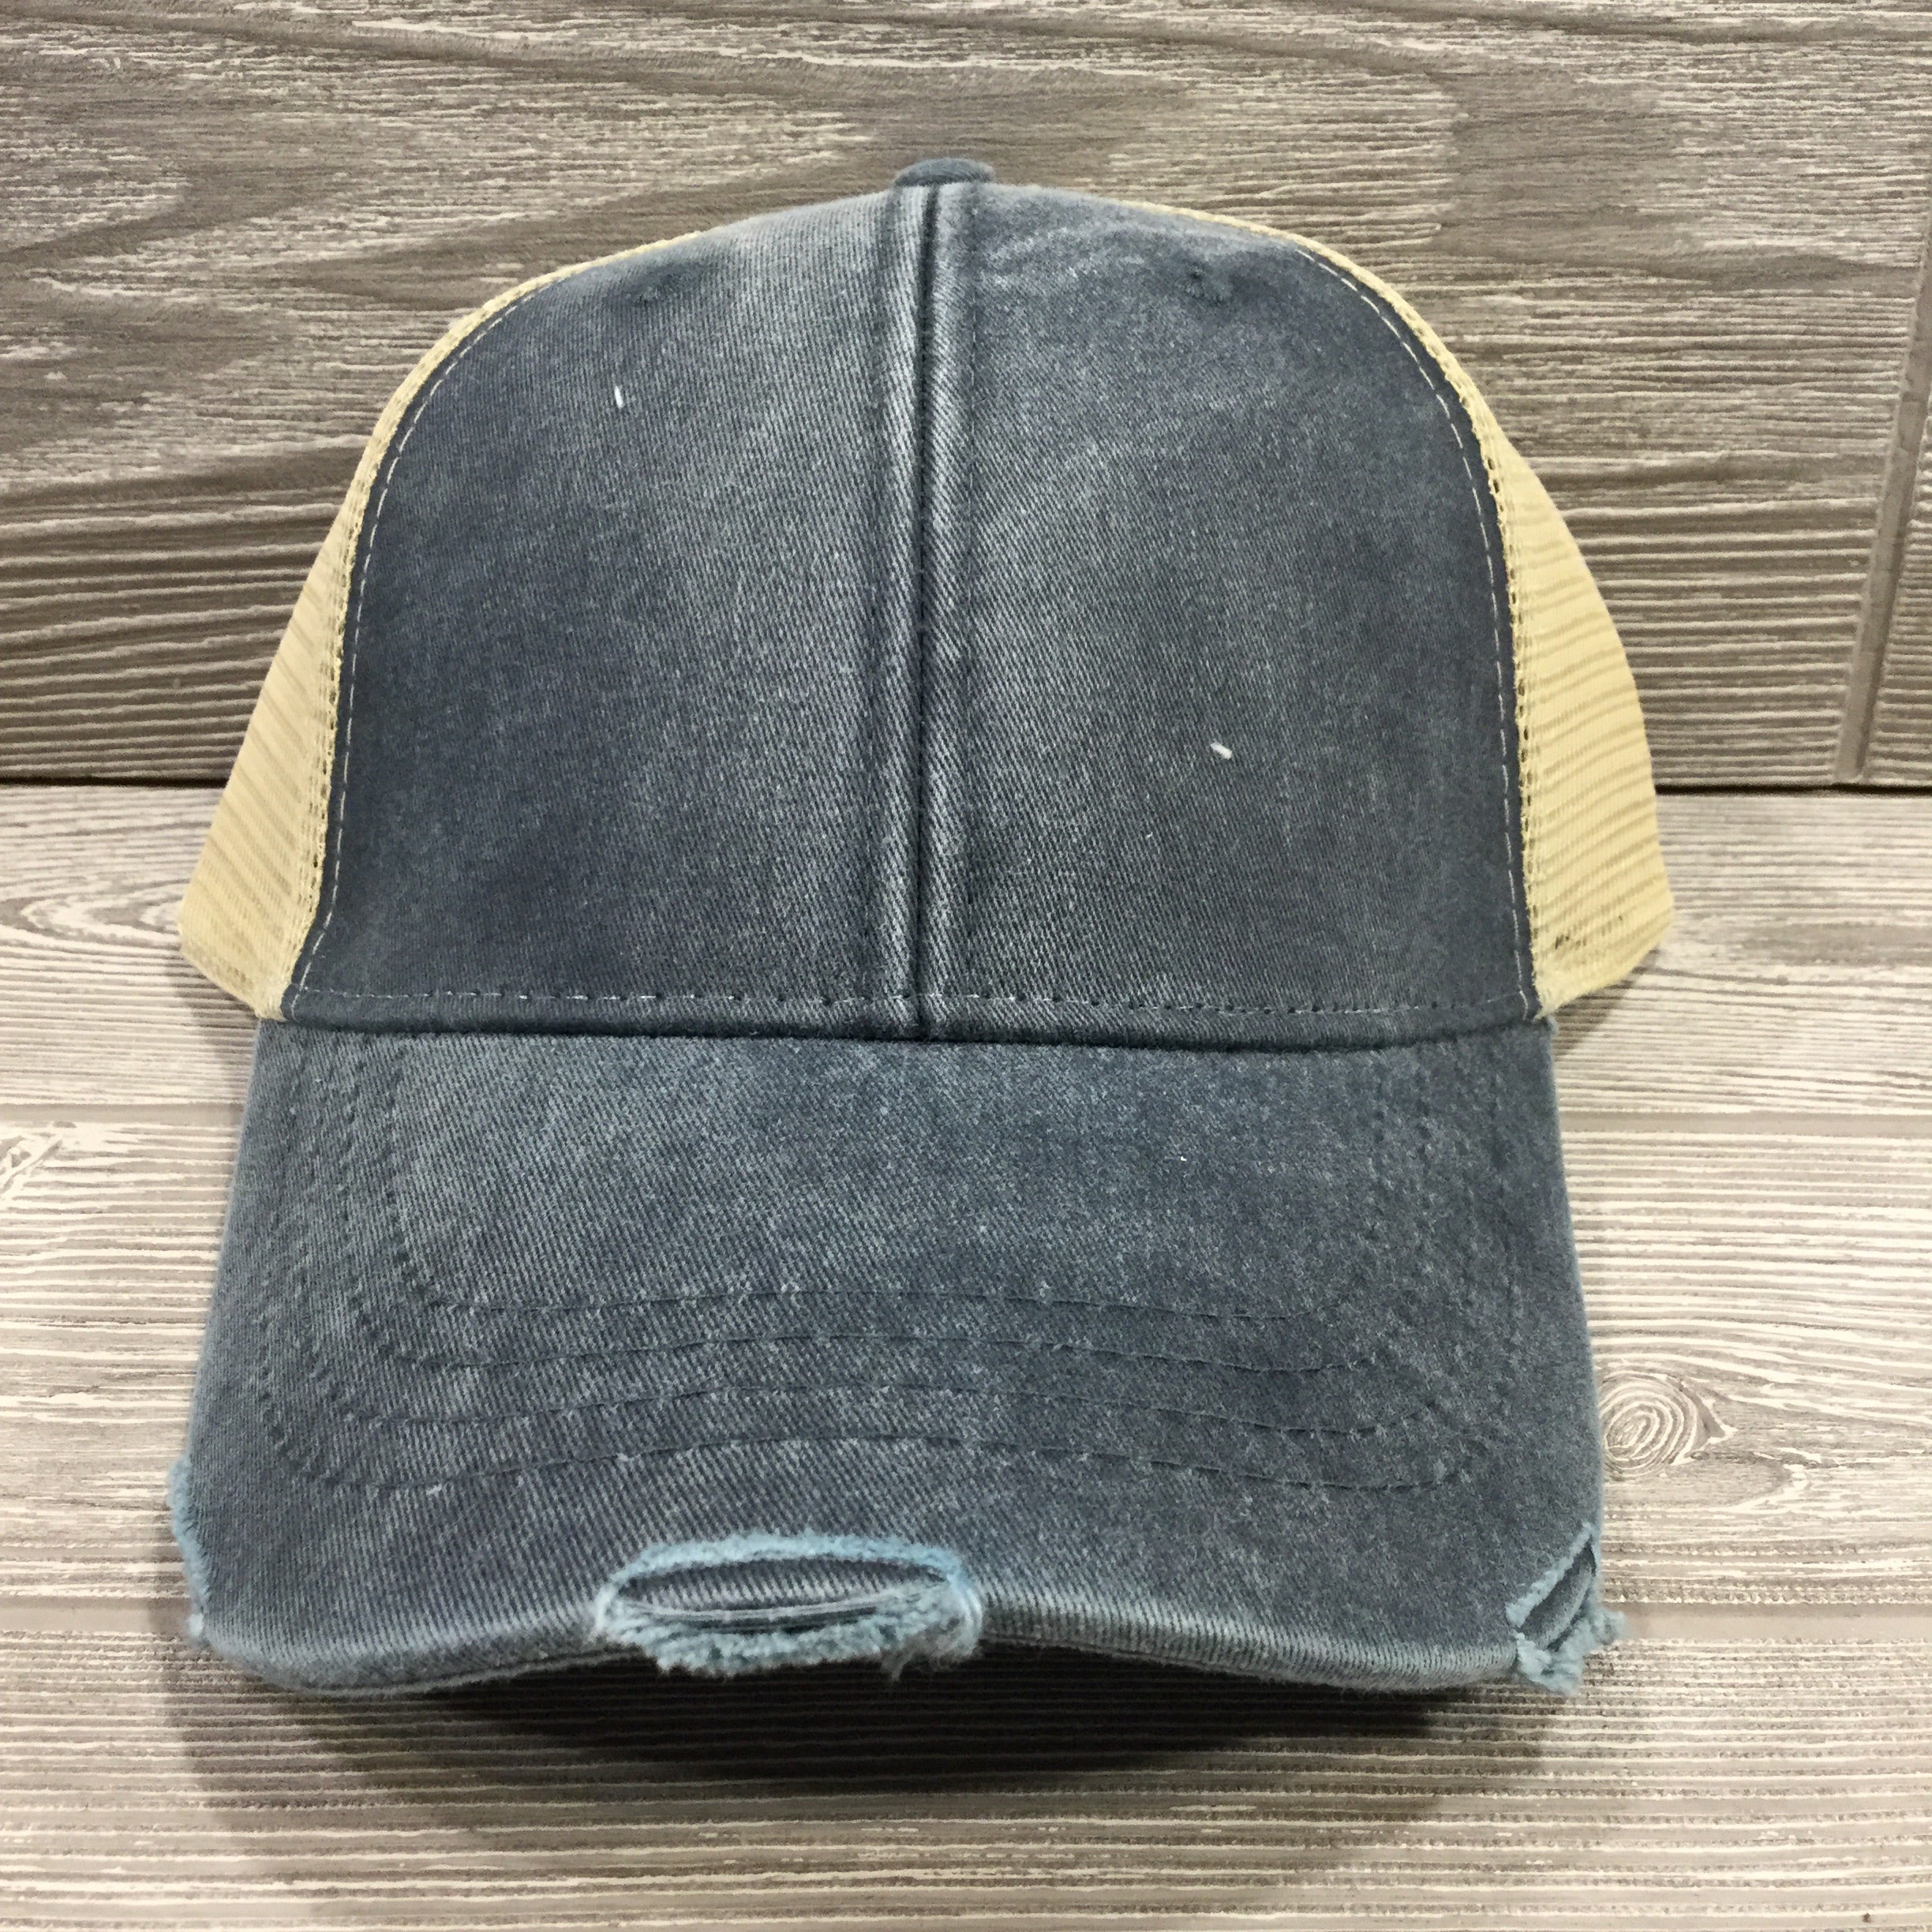 4 Panel Back Vines and Snap & Colo Sides – 4 Hats, with Closure, Net Tan Trucker Pines